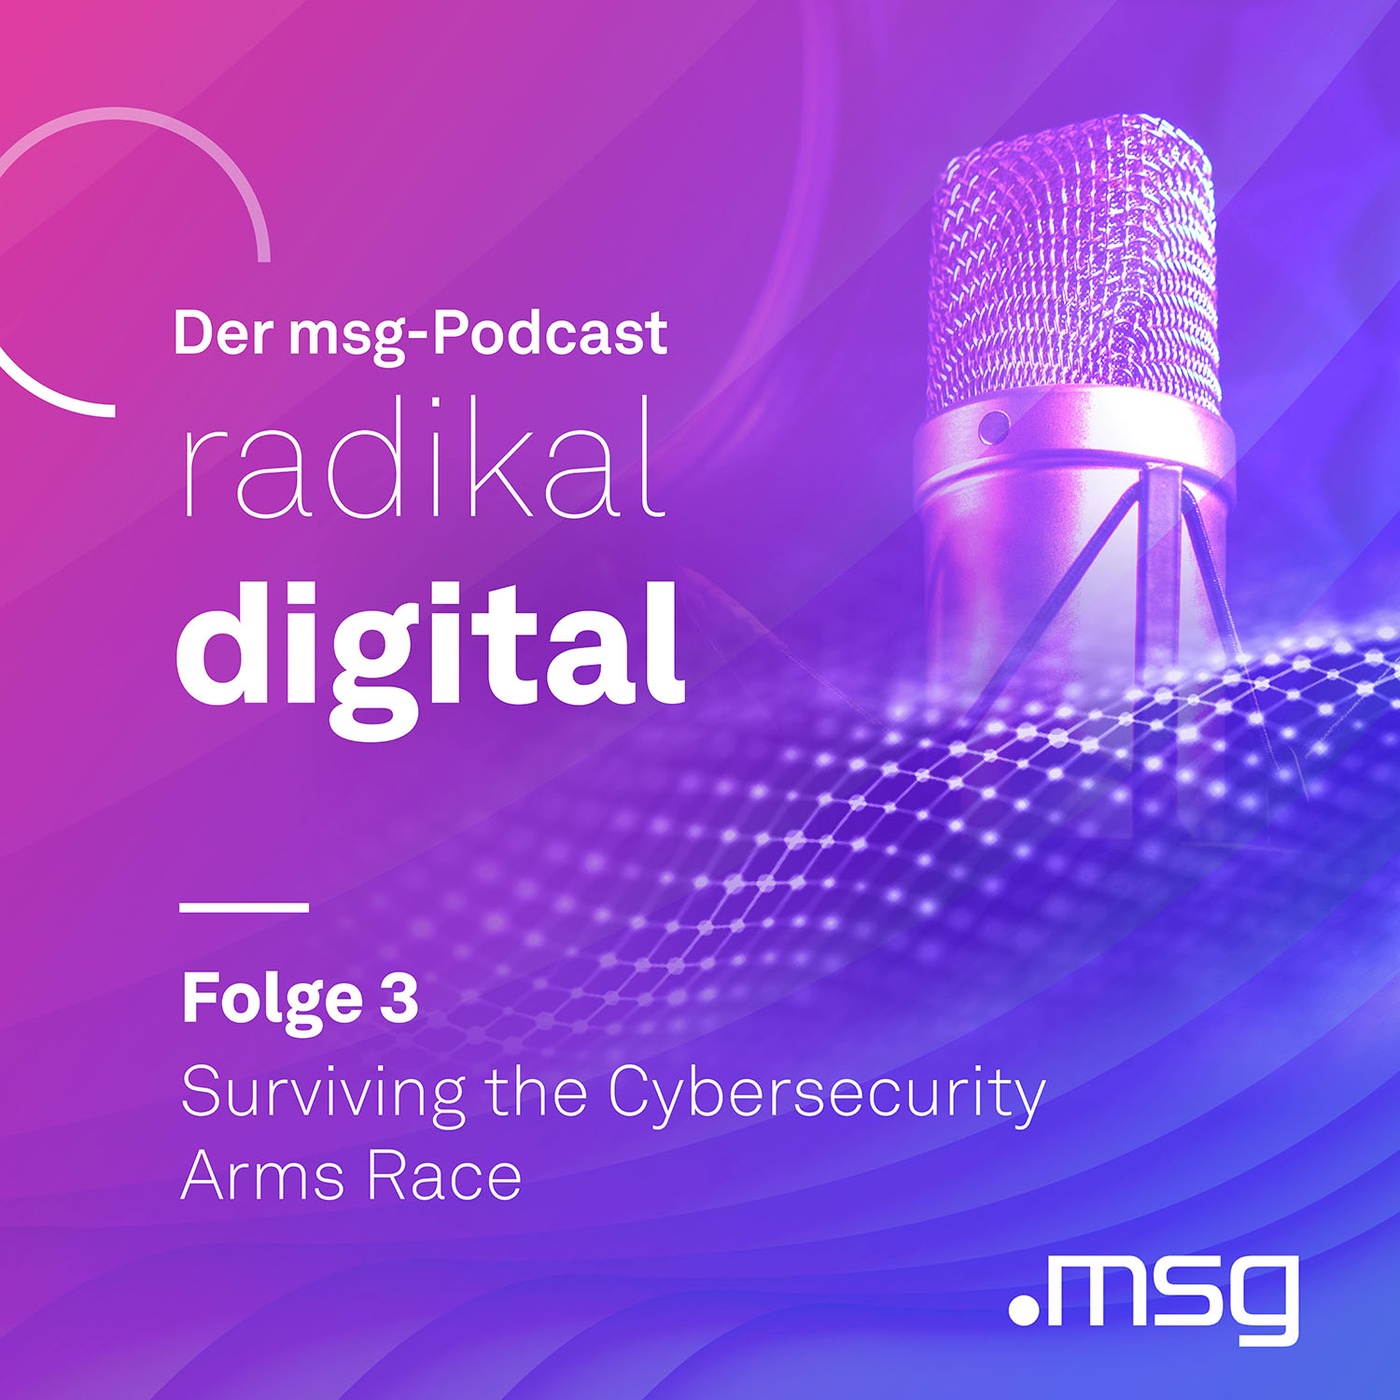 Folge 3: Surviving the Cybersecurity Arms Race